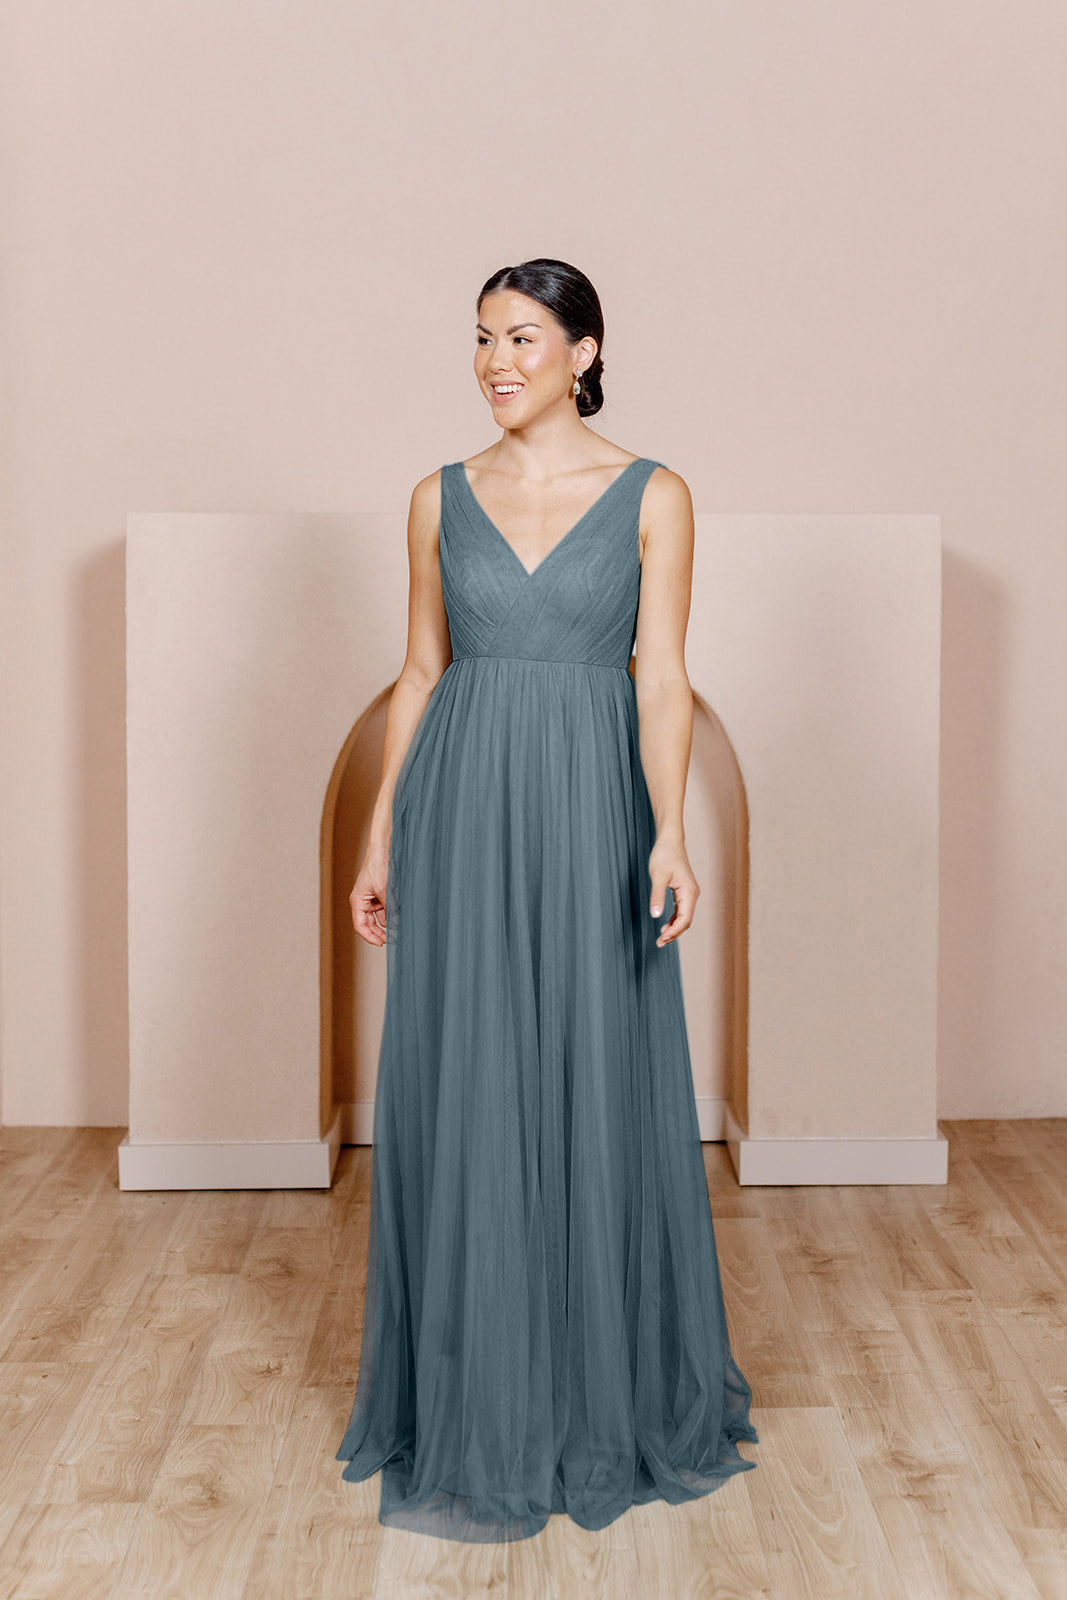 Mist Bridesmaid Dress at Revelry | Jamie Tulle Dress | Made to Order Mist